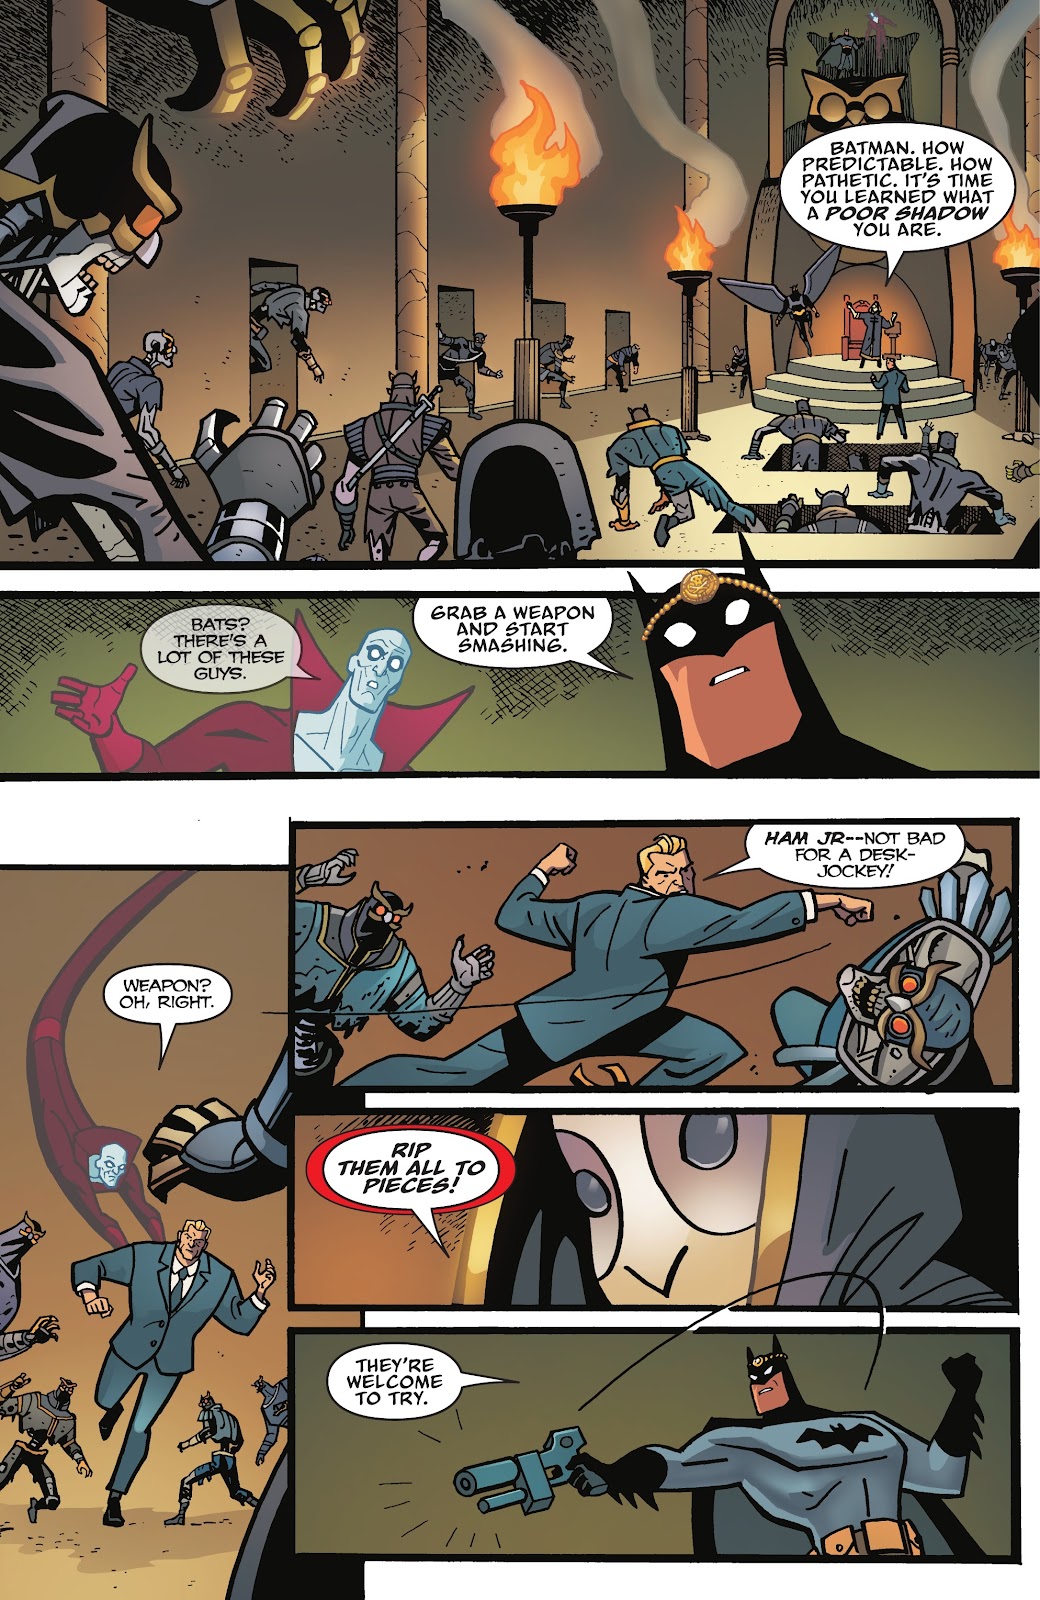 Batman: The Adventures Continue: Season Two issue 2 - Page 19